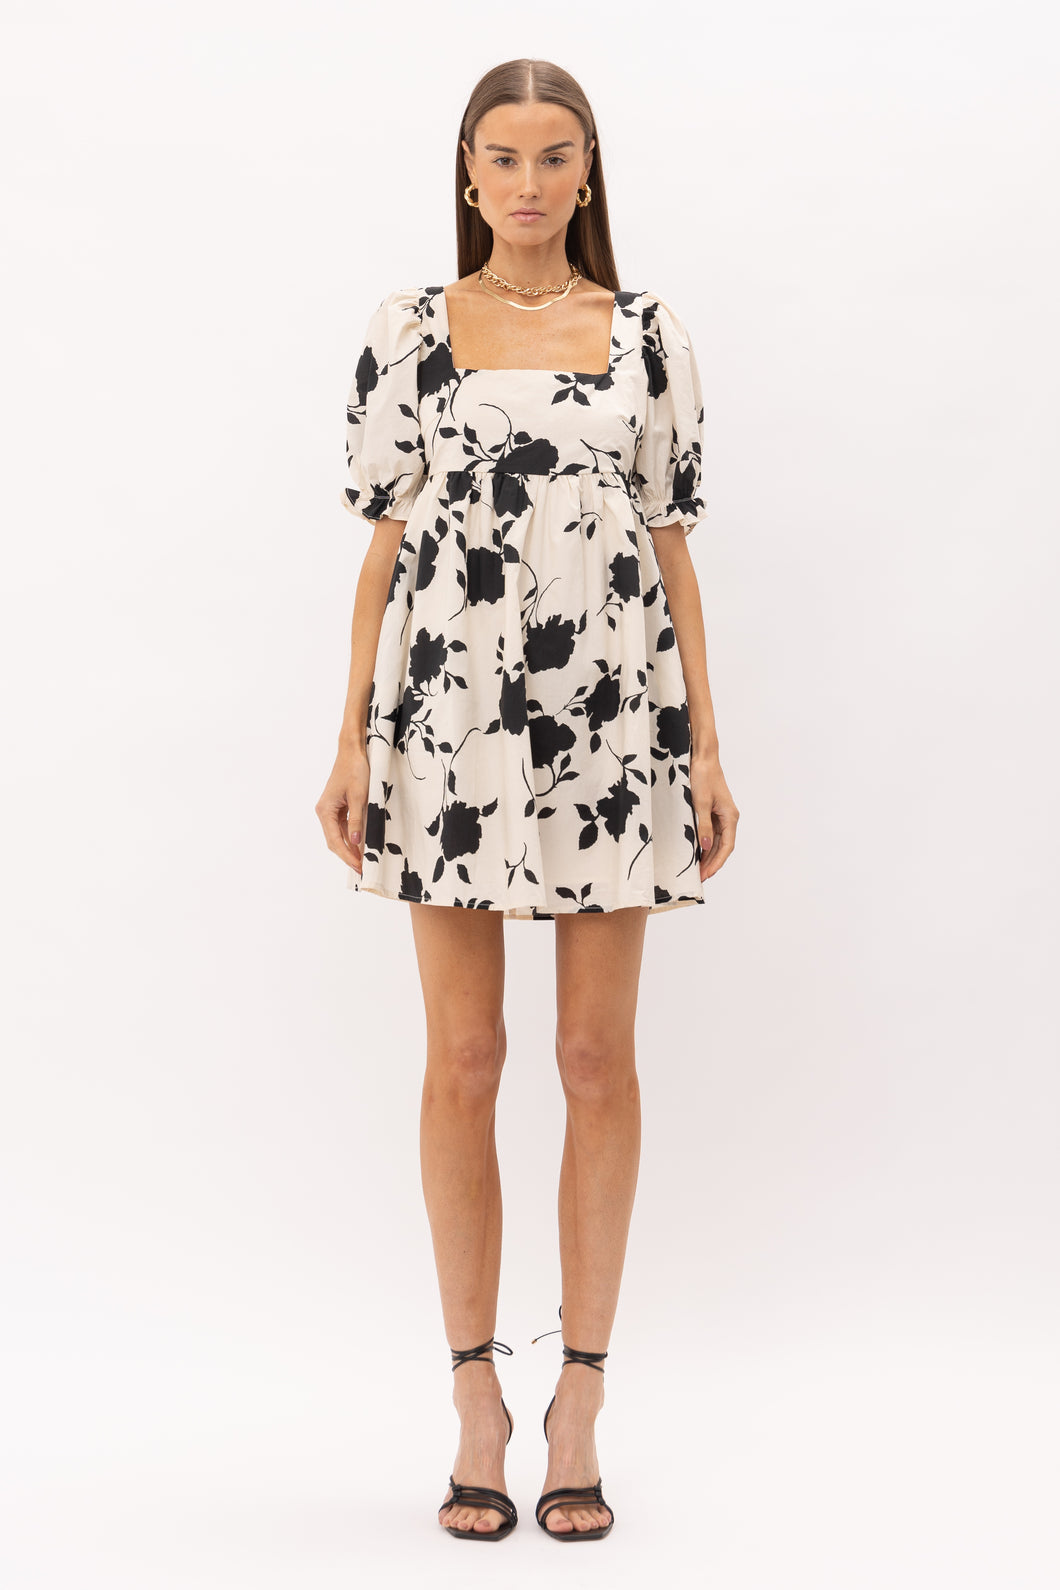 Black and Ivory Floral Dress